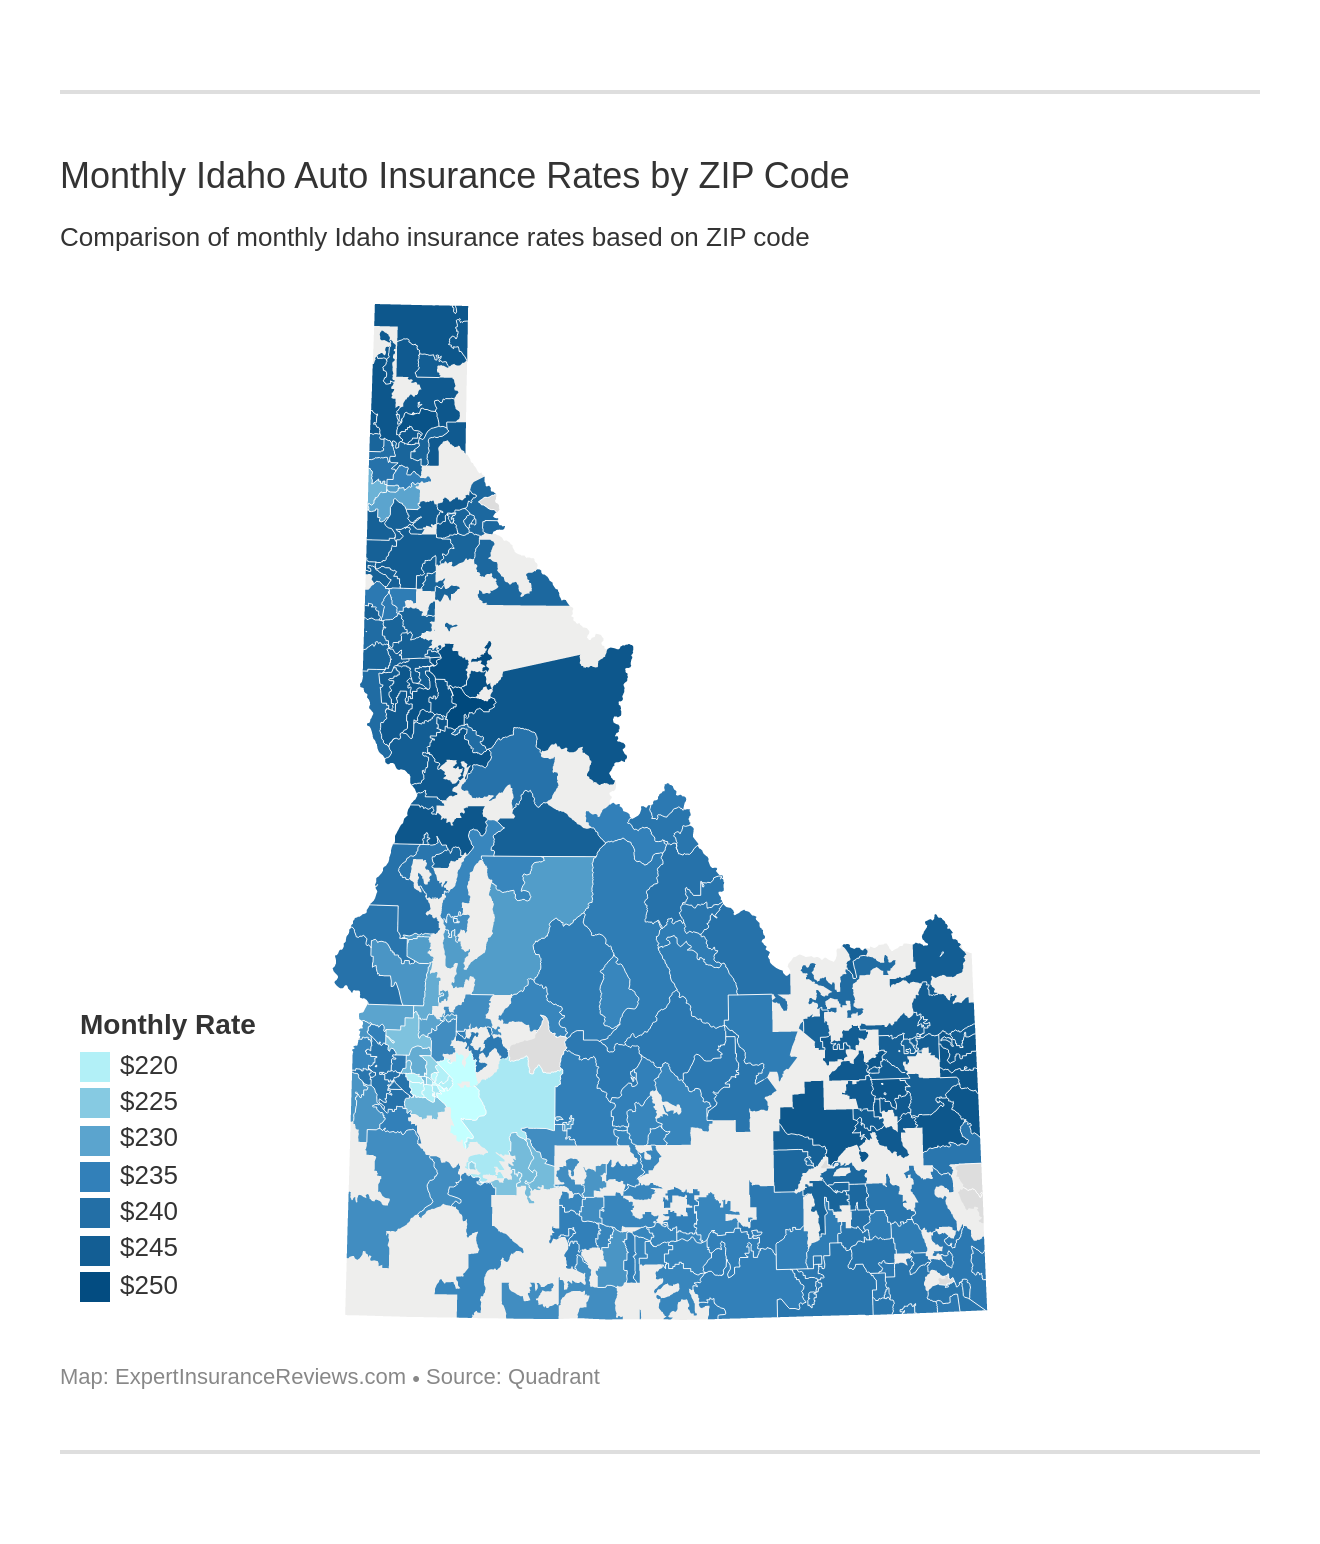 Monthly Idaho Auto Insurance Rates by ZIP Code